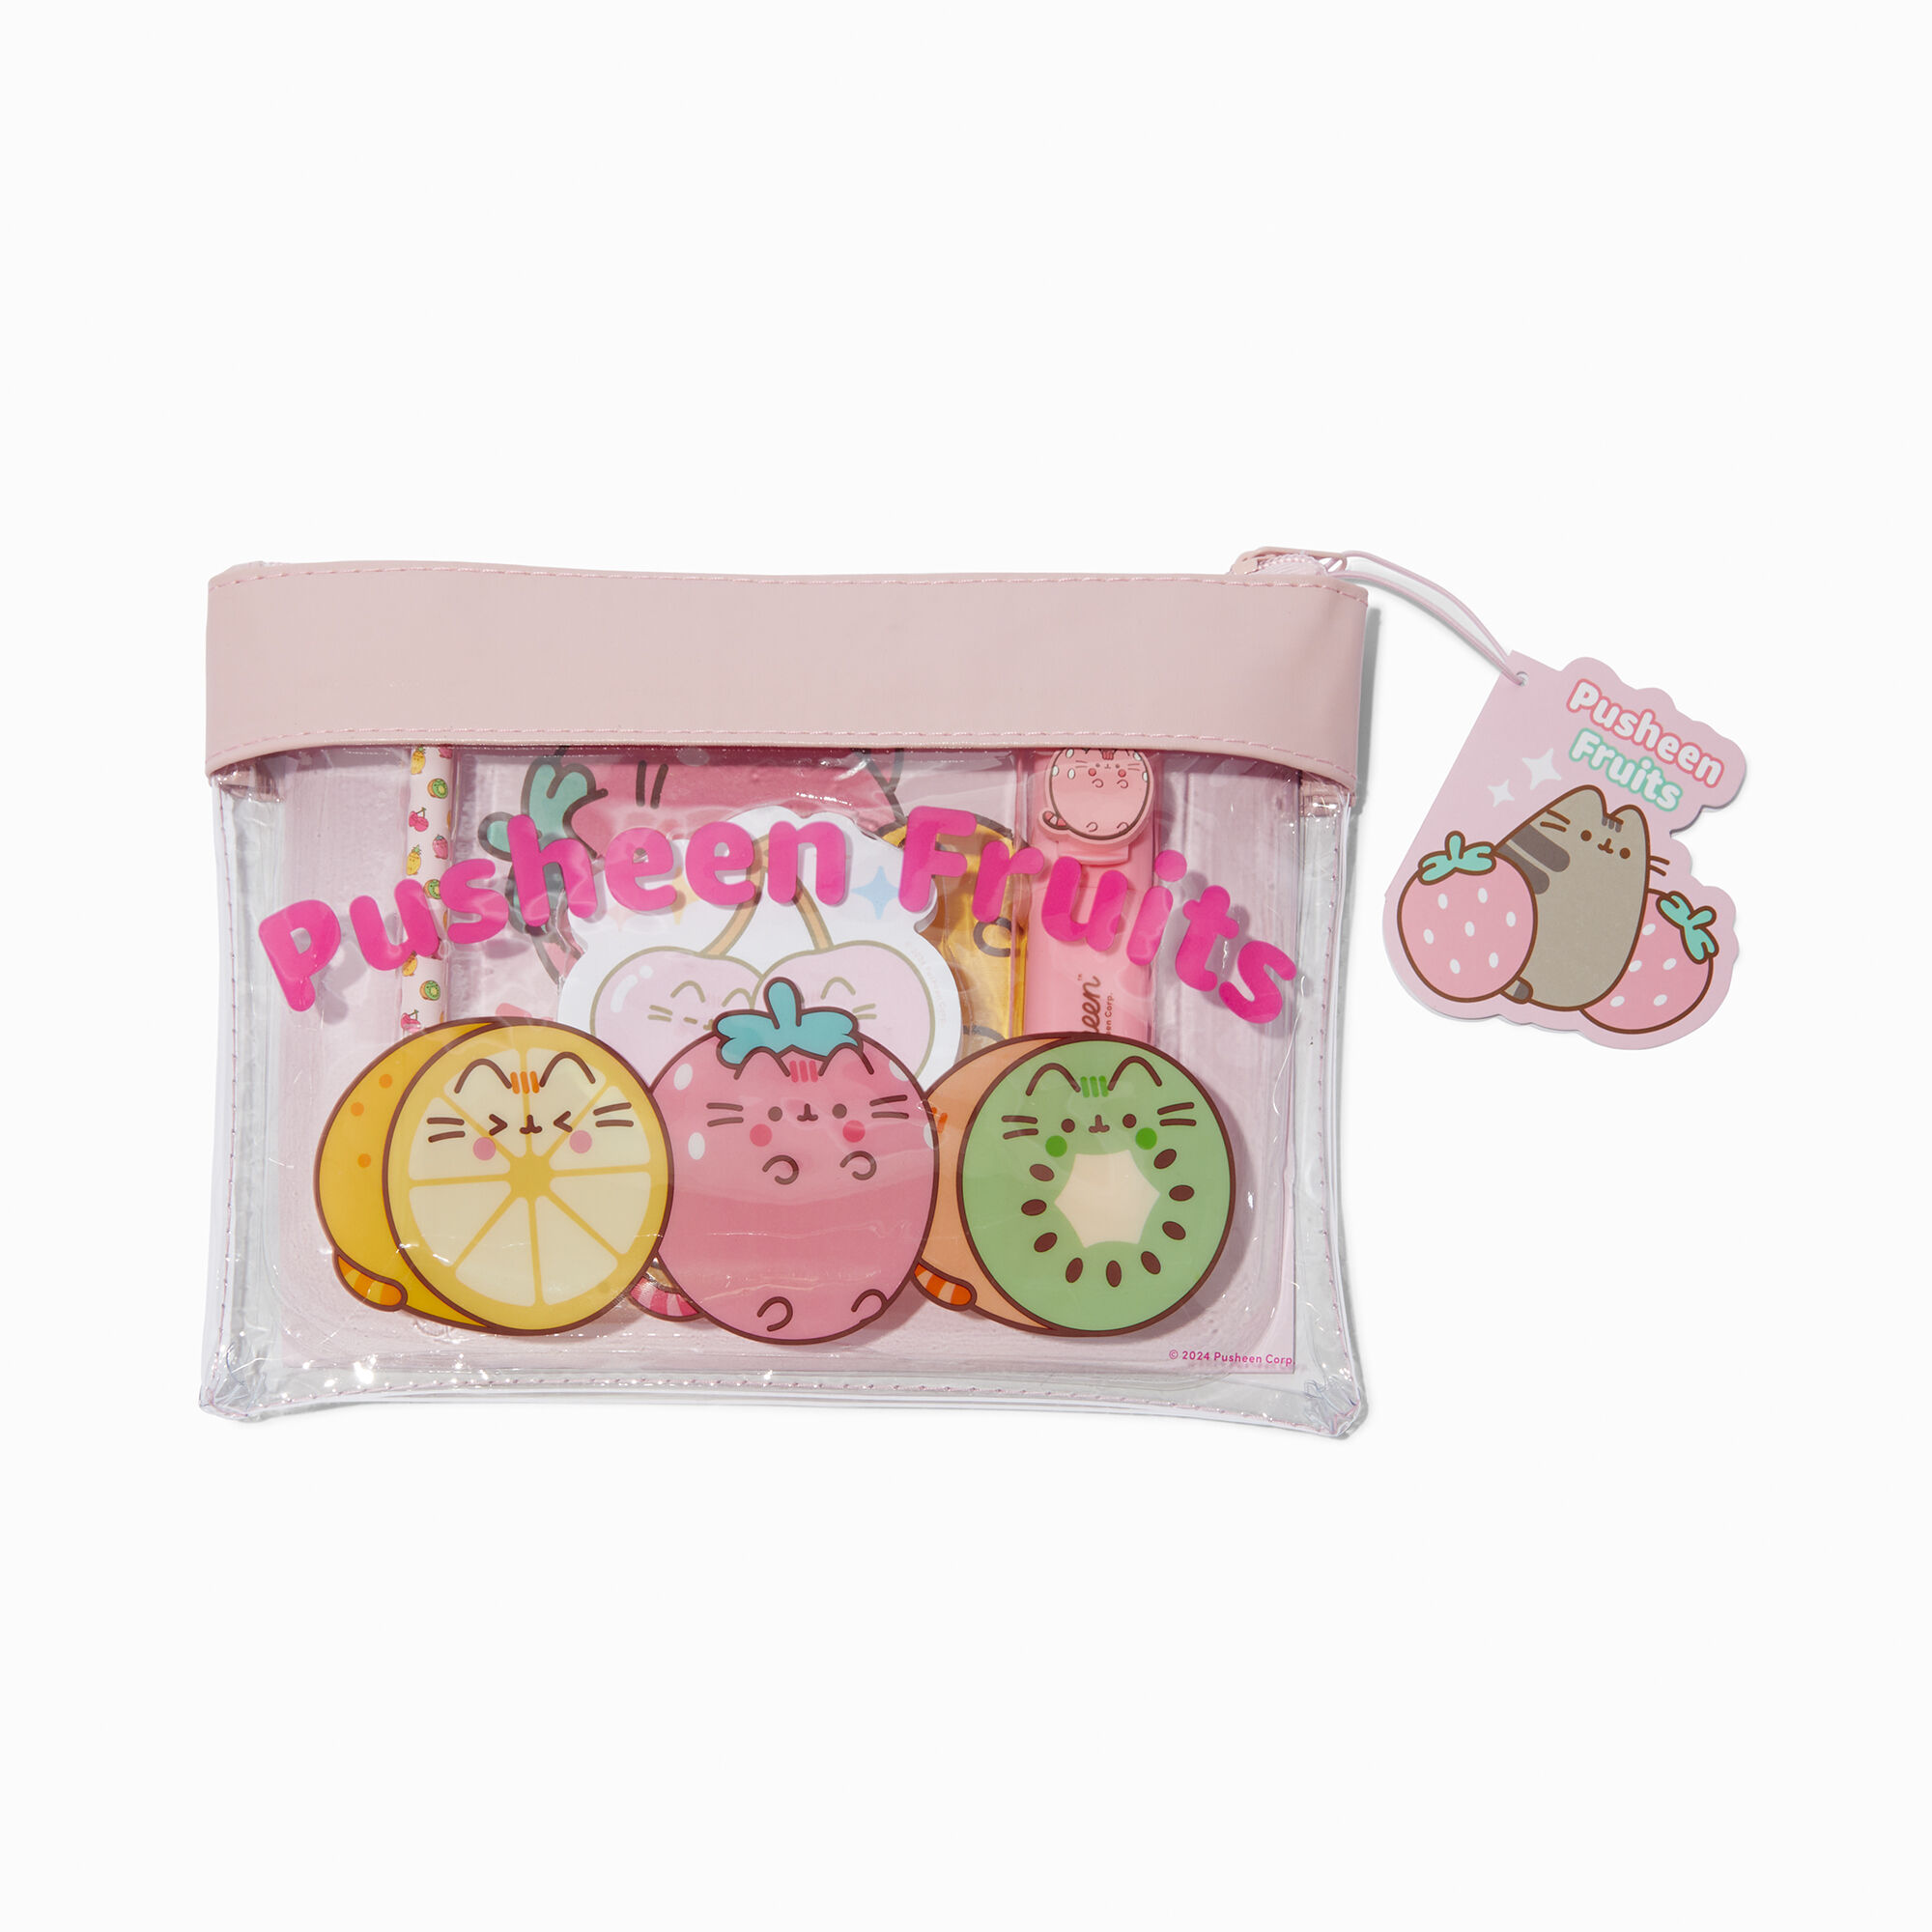 View Claires Pusheen Fruits Stationery Set information